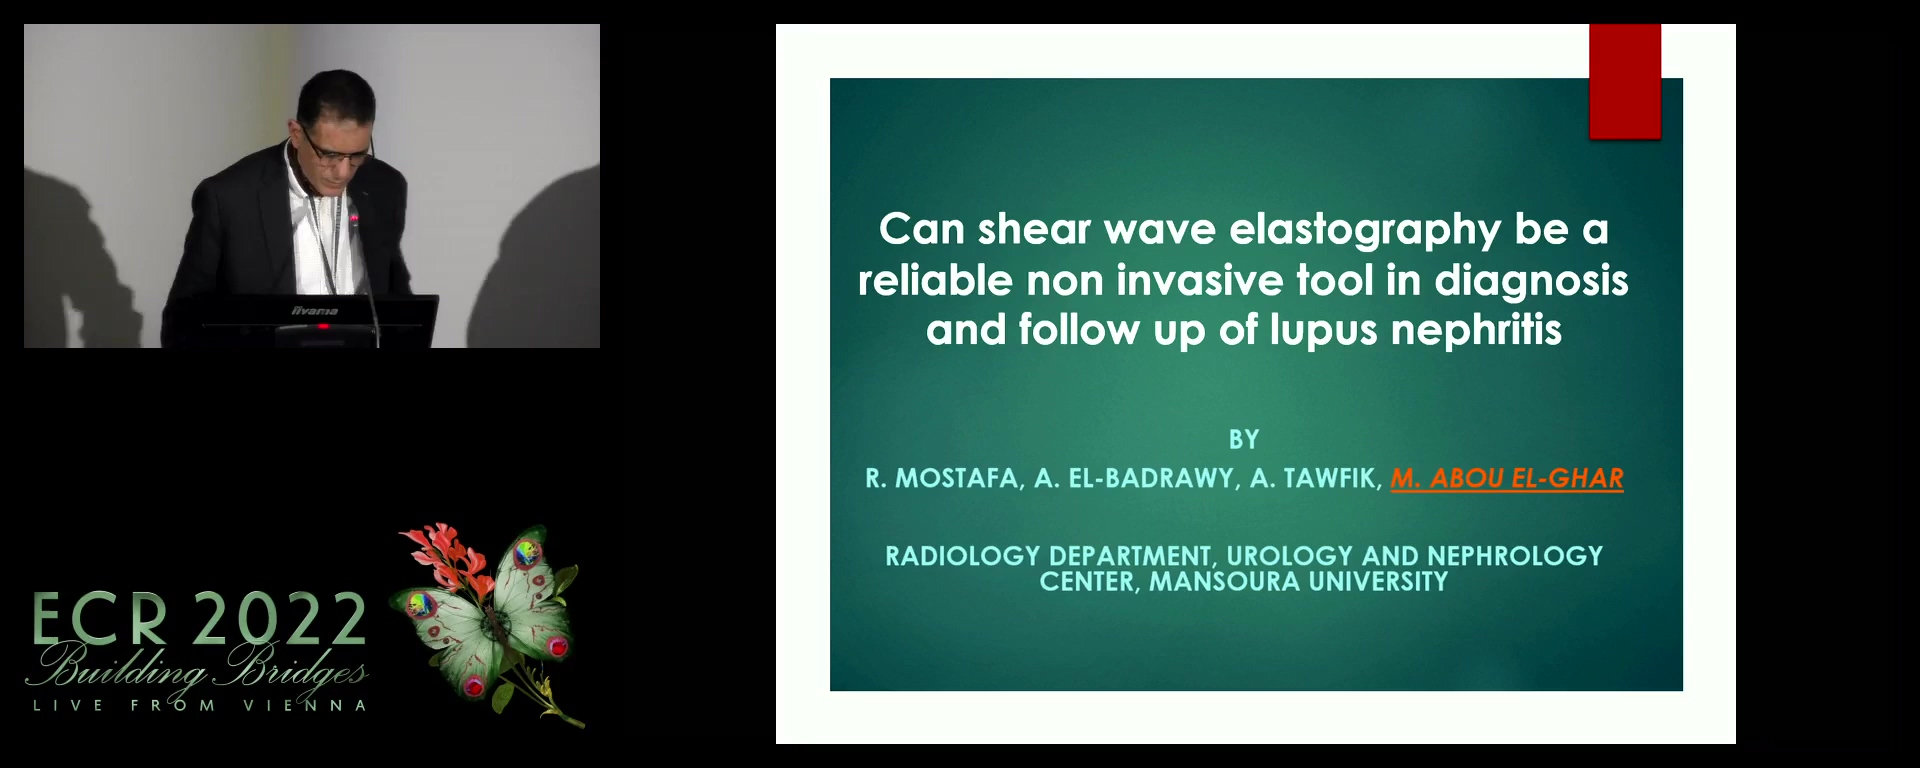 Can shear wave elastography be a reliable non-invasive tool in diagnosis and follow-up of lupus nephritis?